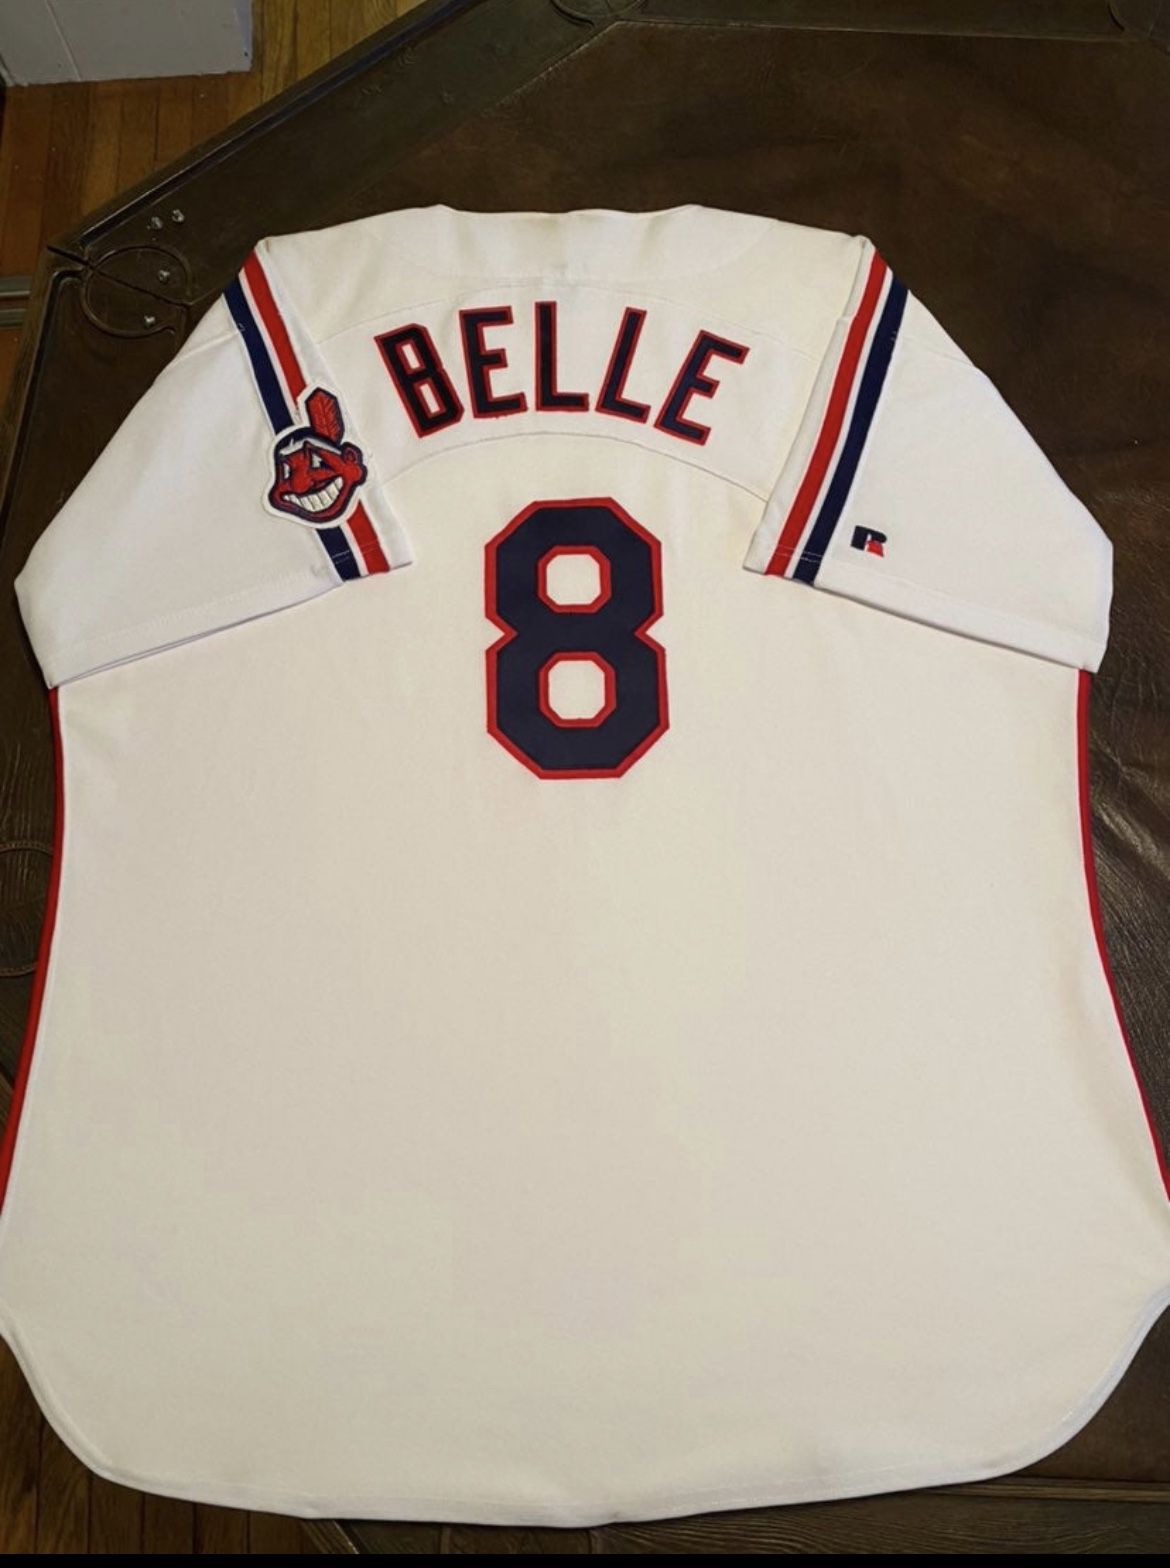 1993 Albert Belle Game Worn Jersey for Sale in Brunswick, OH - OfferUp